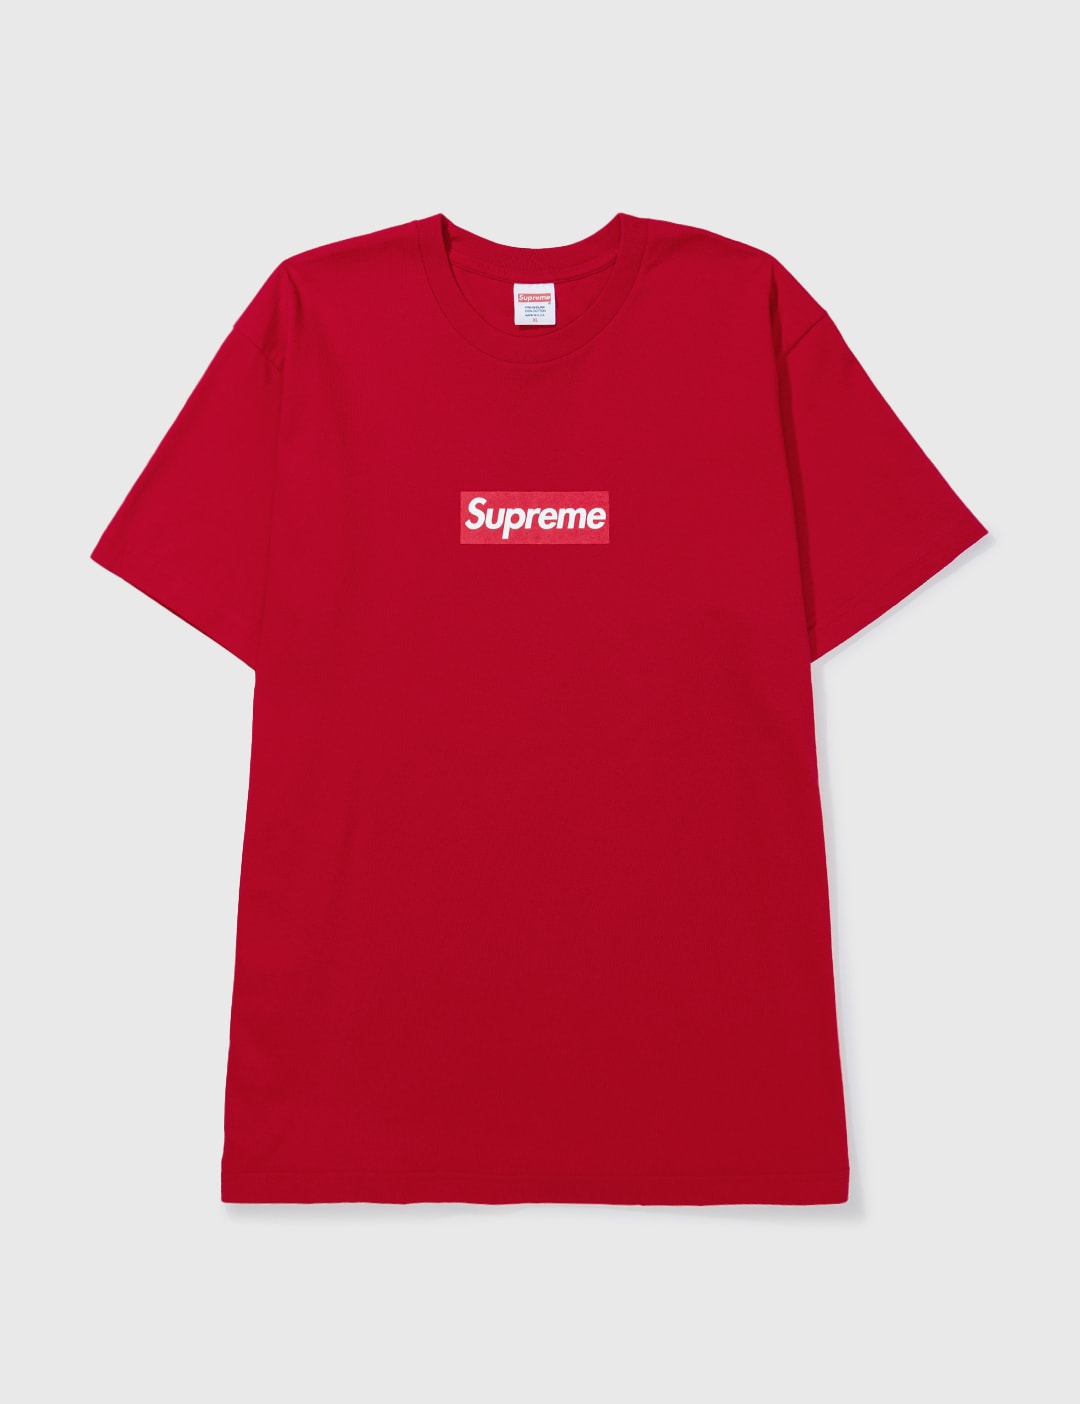 Supreme - 20TH ANNIVERSARY BOX T-shirt | Globally Curated Fashion Lifestyle by Hypebeast